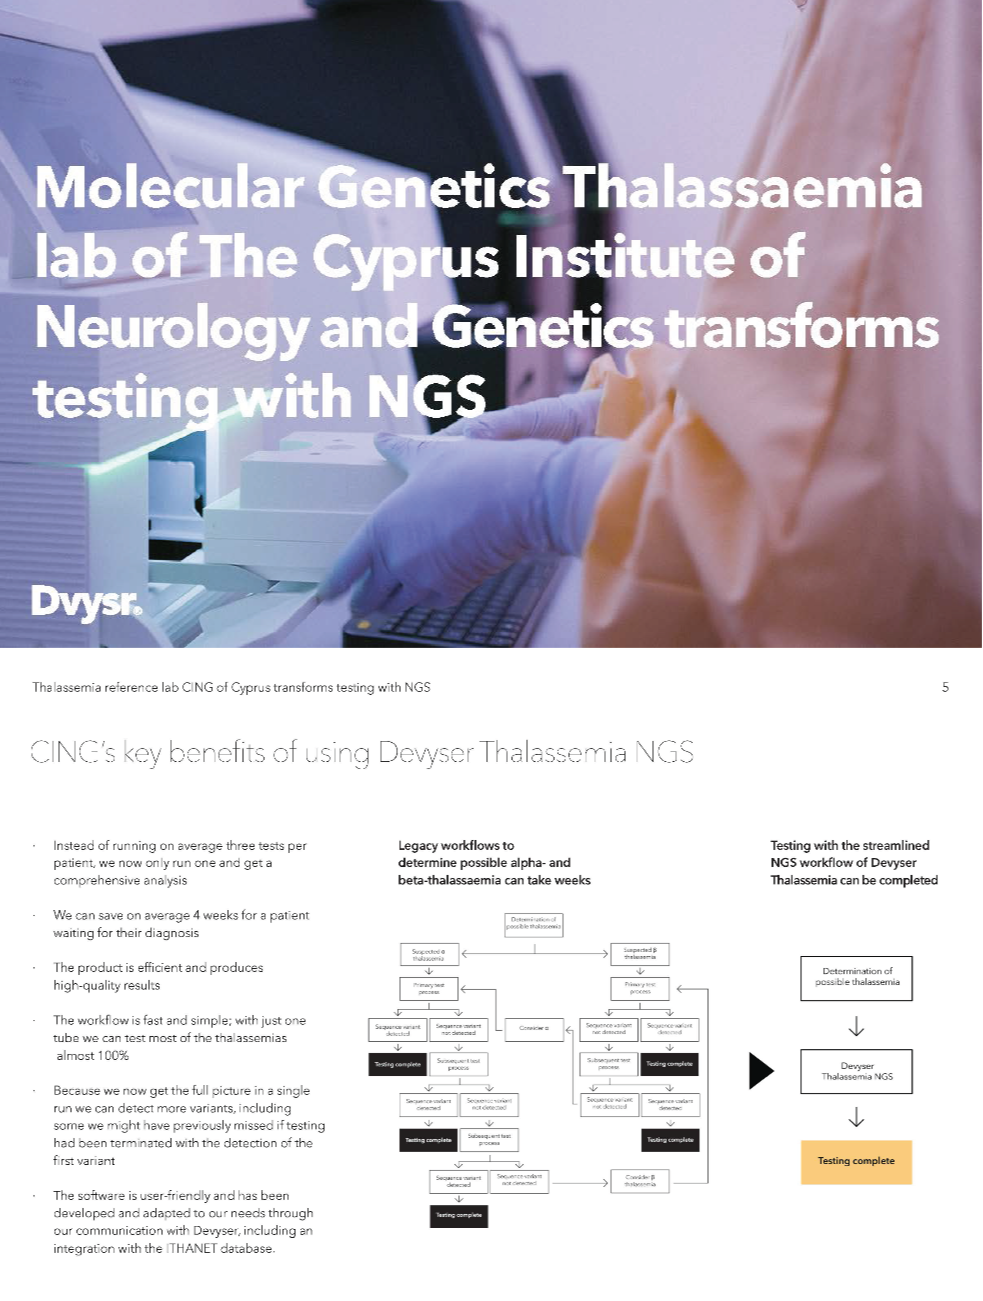 CING of Cyprus transforms thalassemia testing with NGS